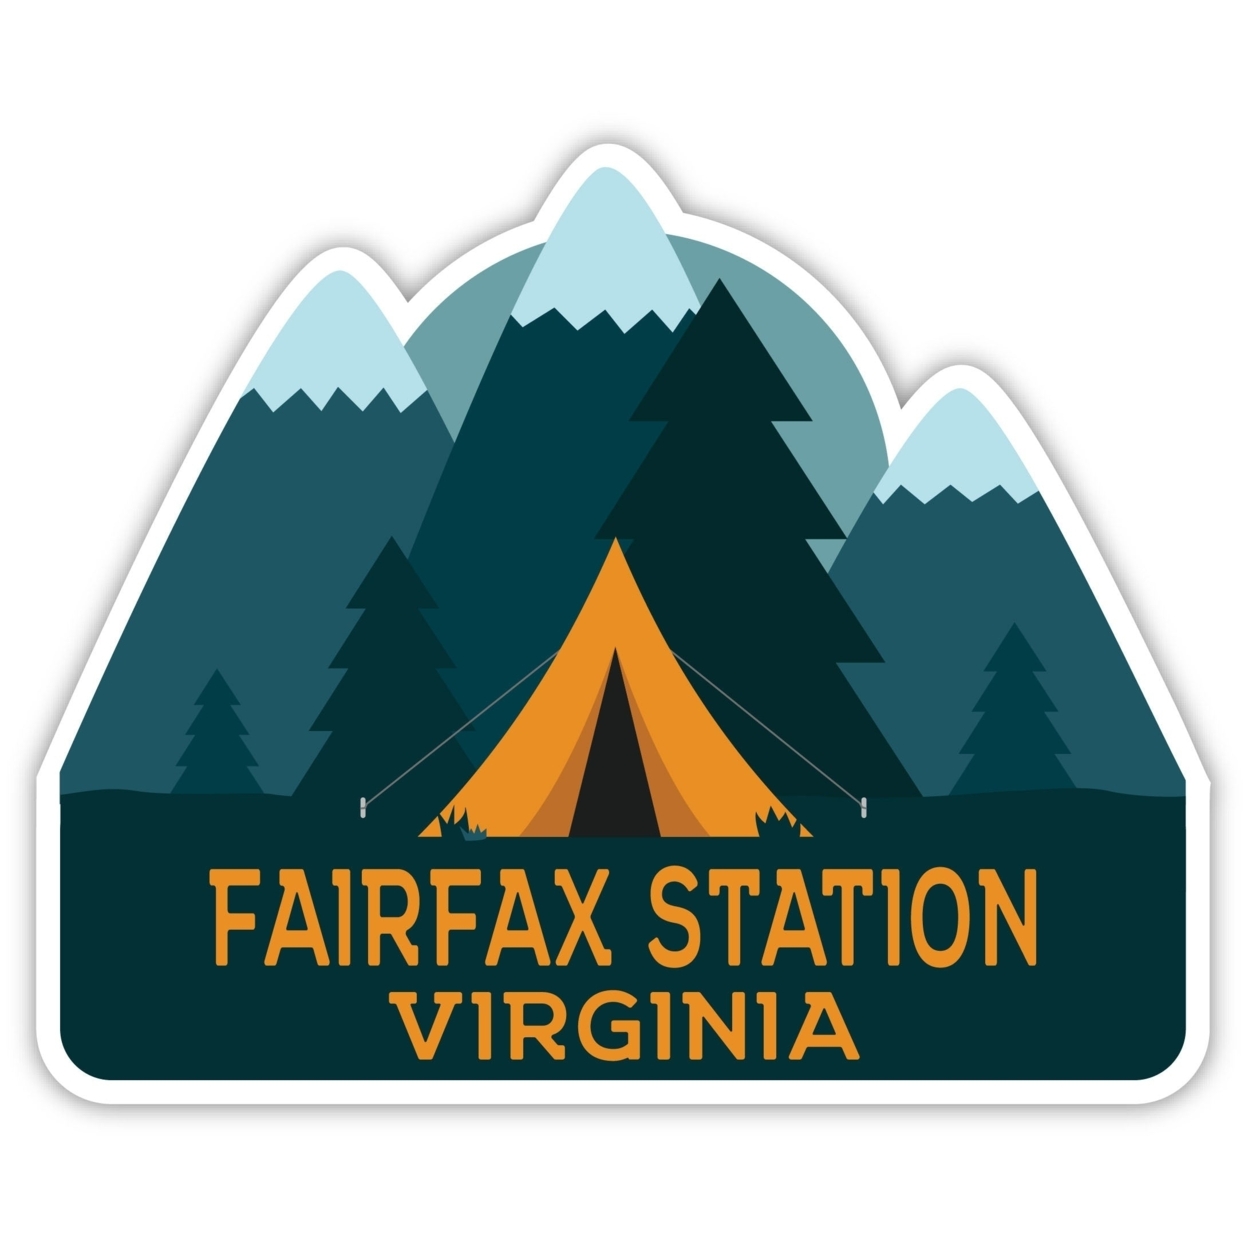 Fairfax Station Virginia Souvenir Decorative Stickers (Choose Theme And Size) - 4-Pack, 10-Inch, Tent